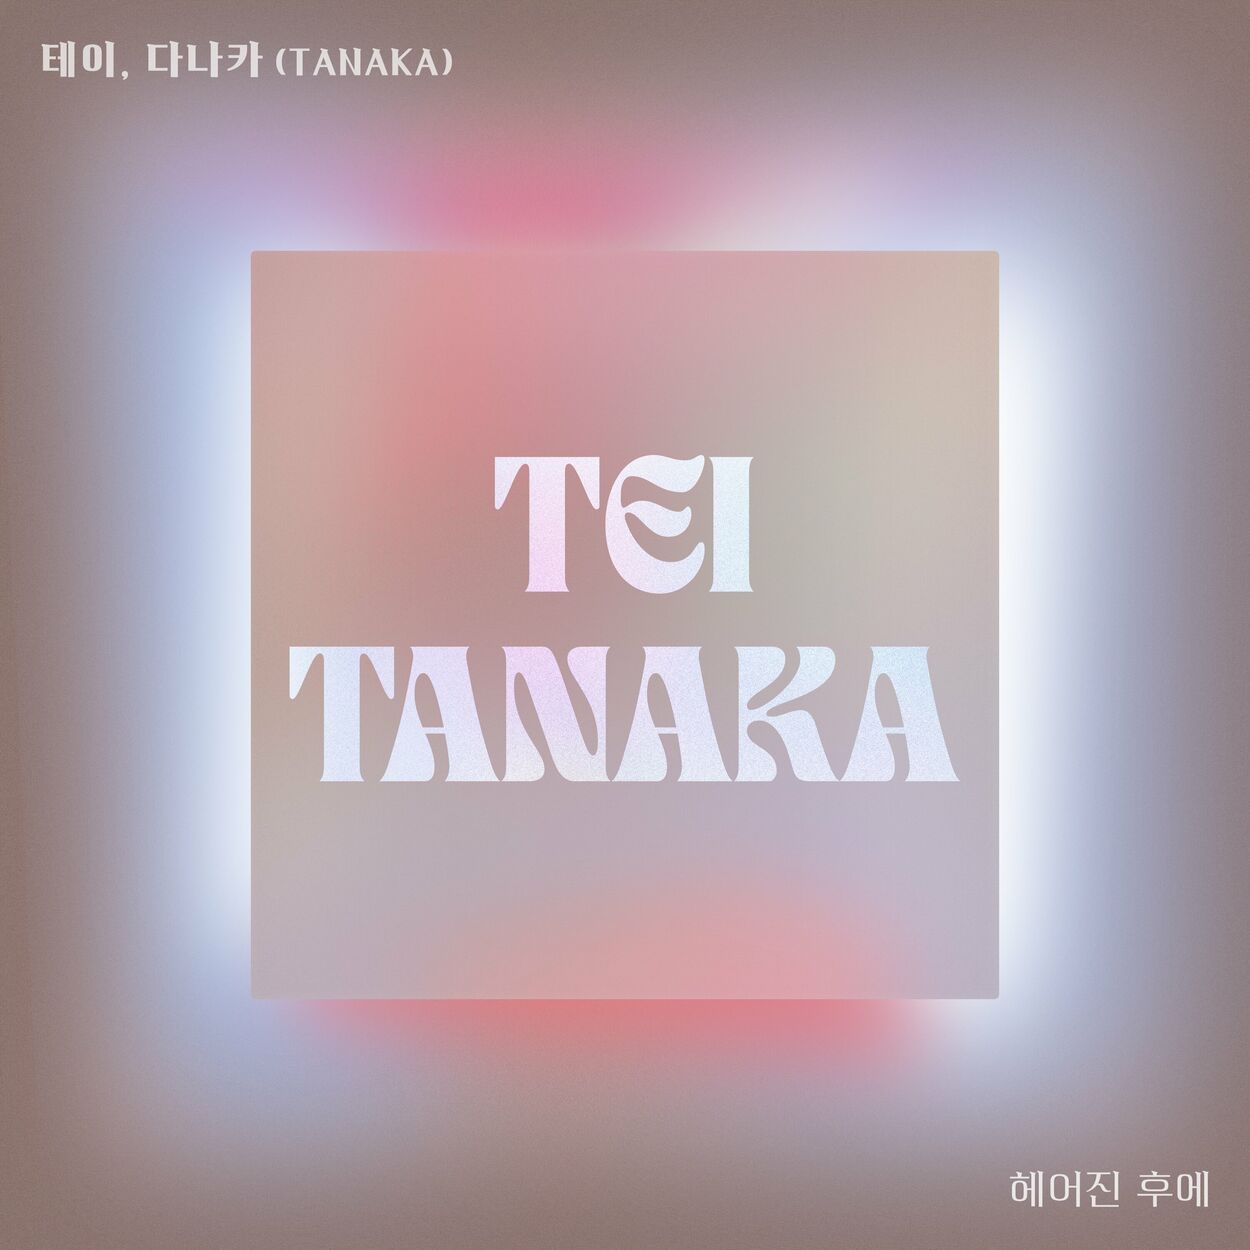 Tei, Tanaka – After breaking up – Single